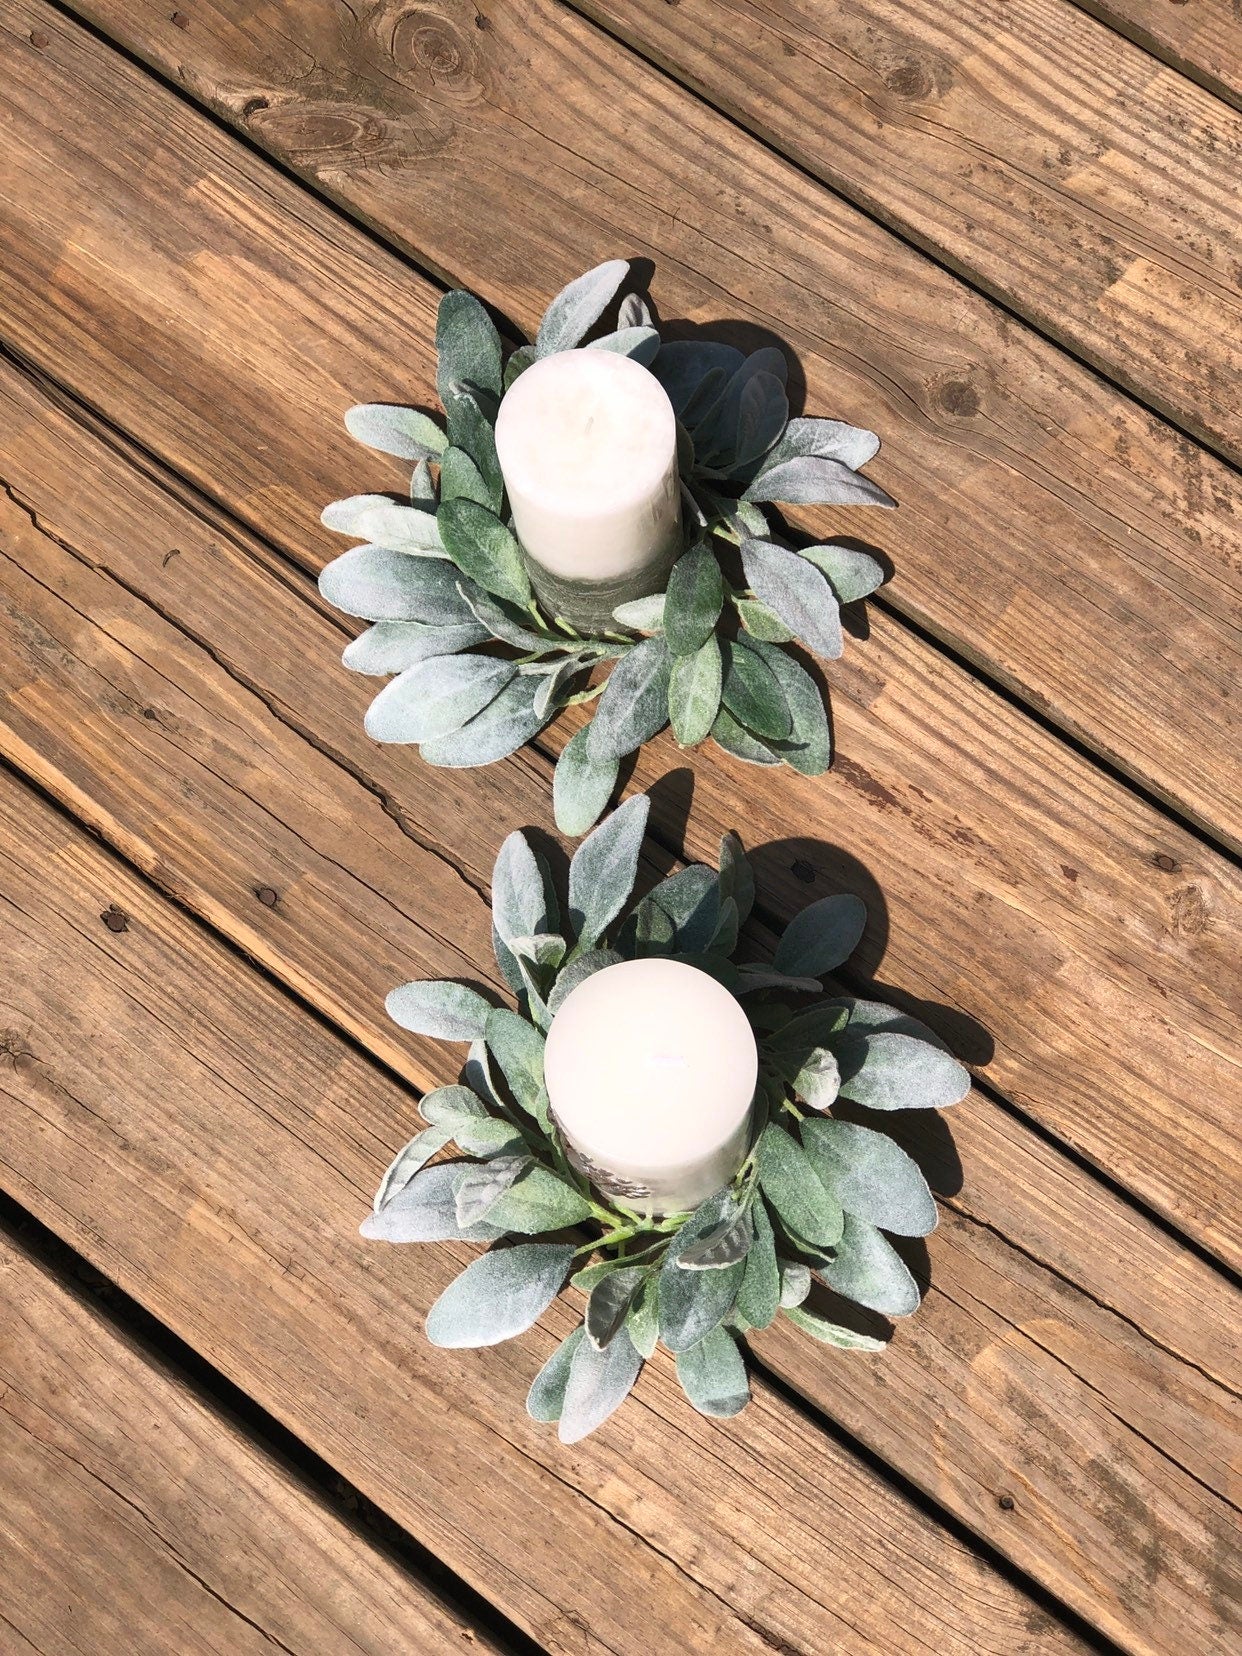 SALE/Lambs Ear Greenery Candle Ring Mini Wreath Wreath for Spring, Year Round Rustic Farmhouse Home Decor, Wedding centerpiece